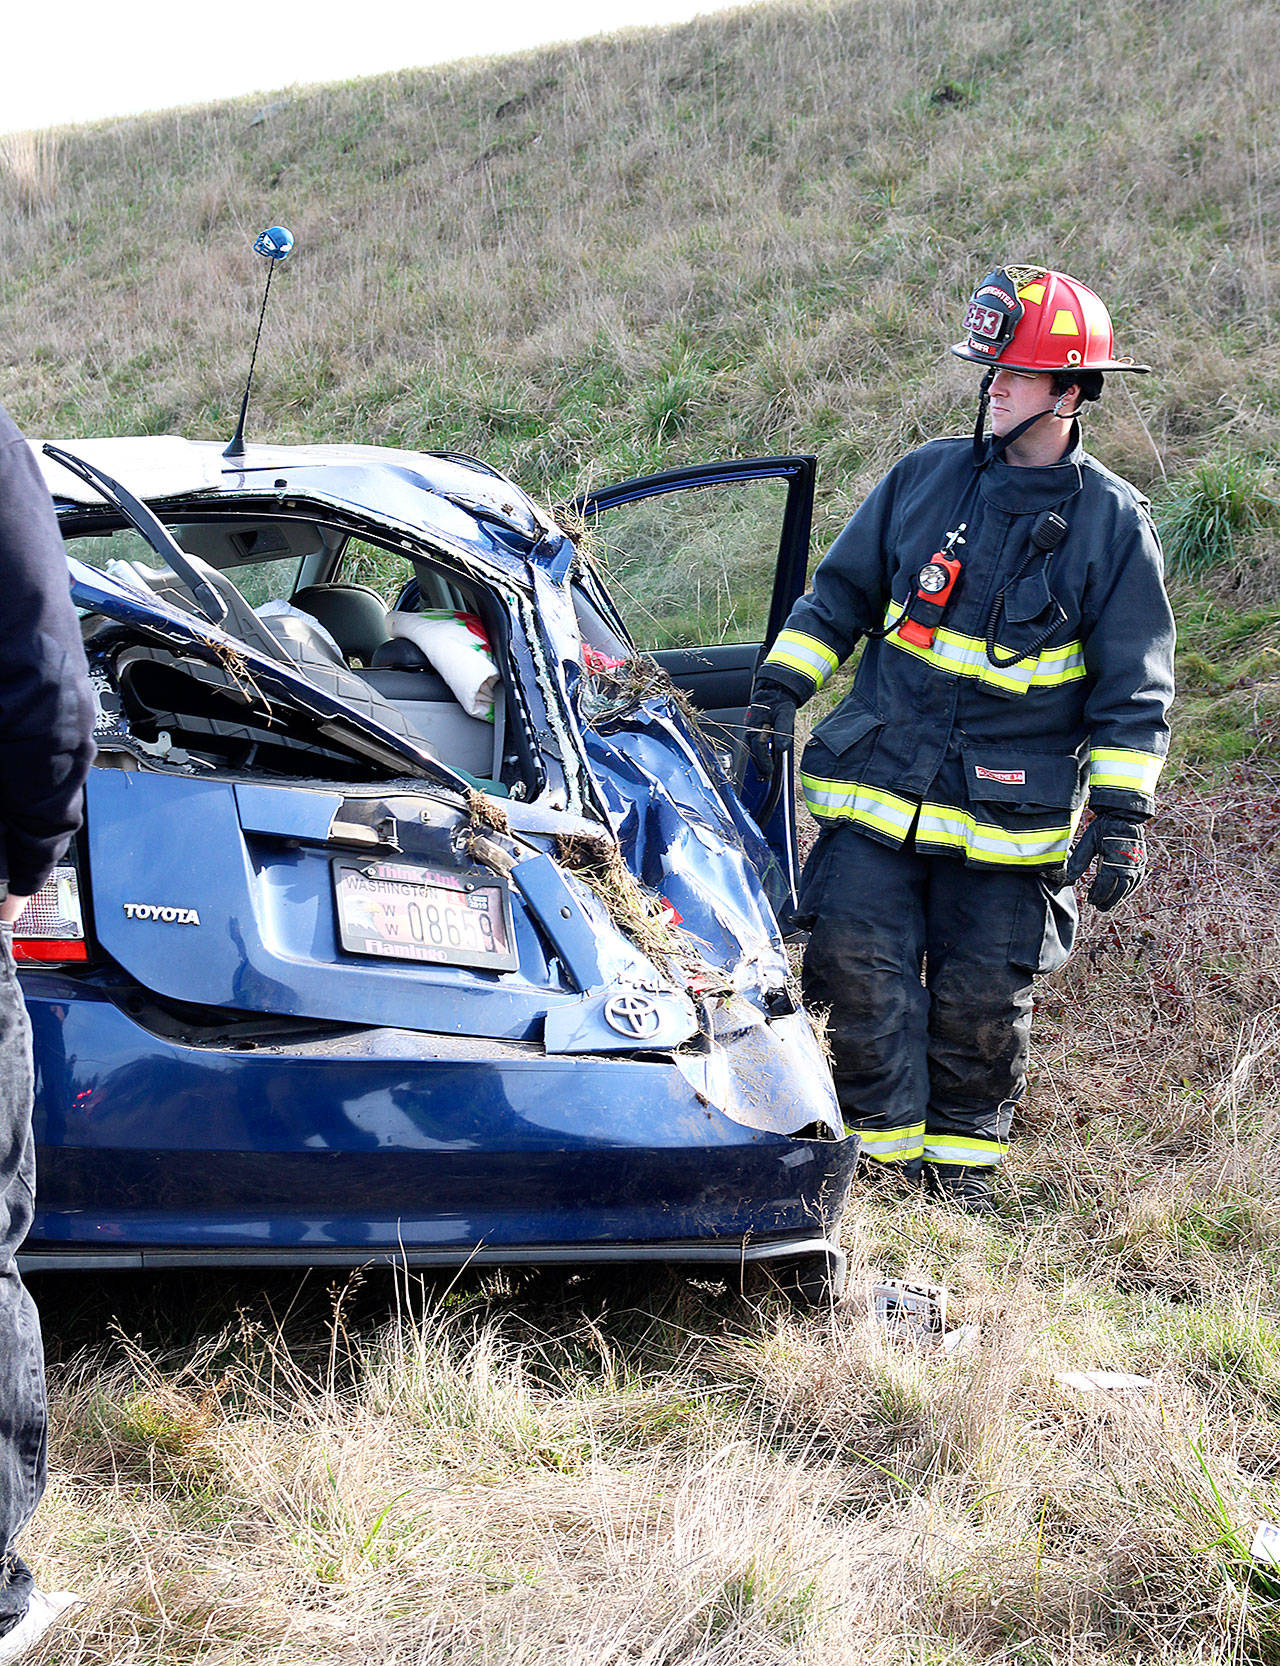 Central Whidbey Island Fire and Rescue Lt. James Meek inspects damage to a prius after a rollover accident off Highway 20 Monday afternoon. Photo by Laura Guido/Whidbey News-Times